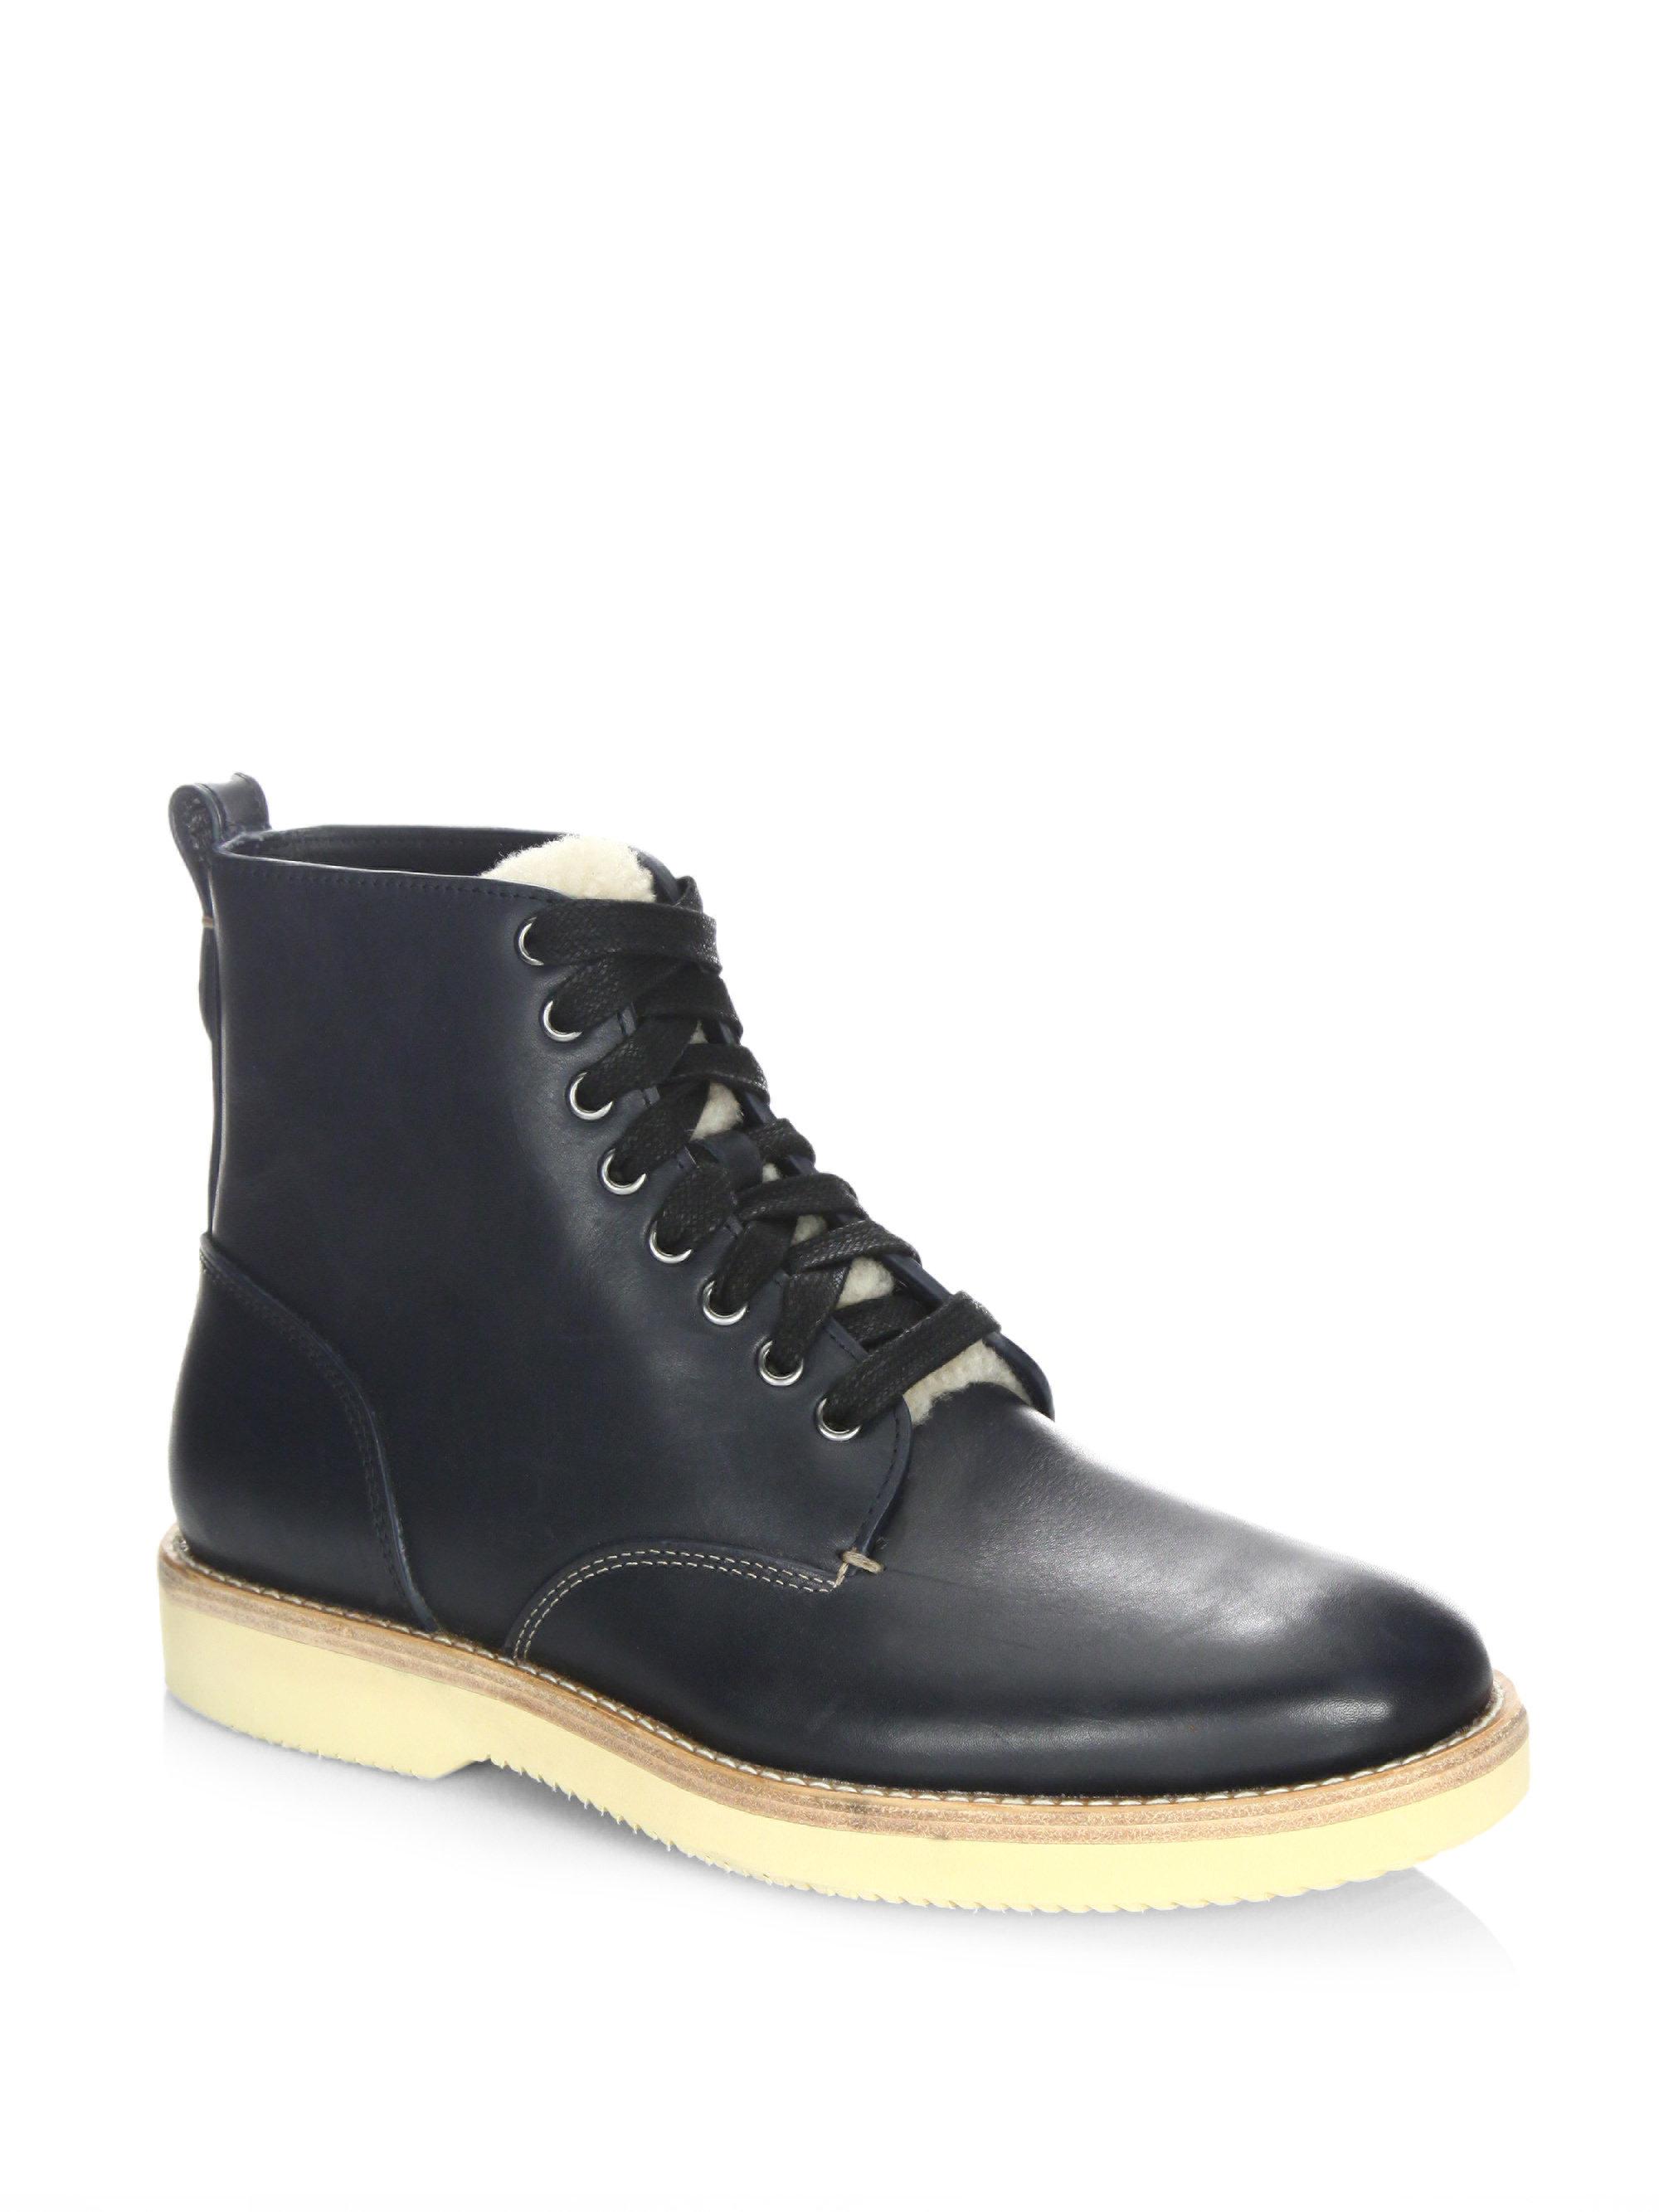 COACH Leather Shearling Derby Boots for Men - Lyst2000 x 2667